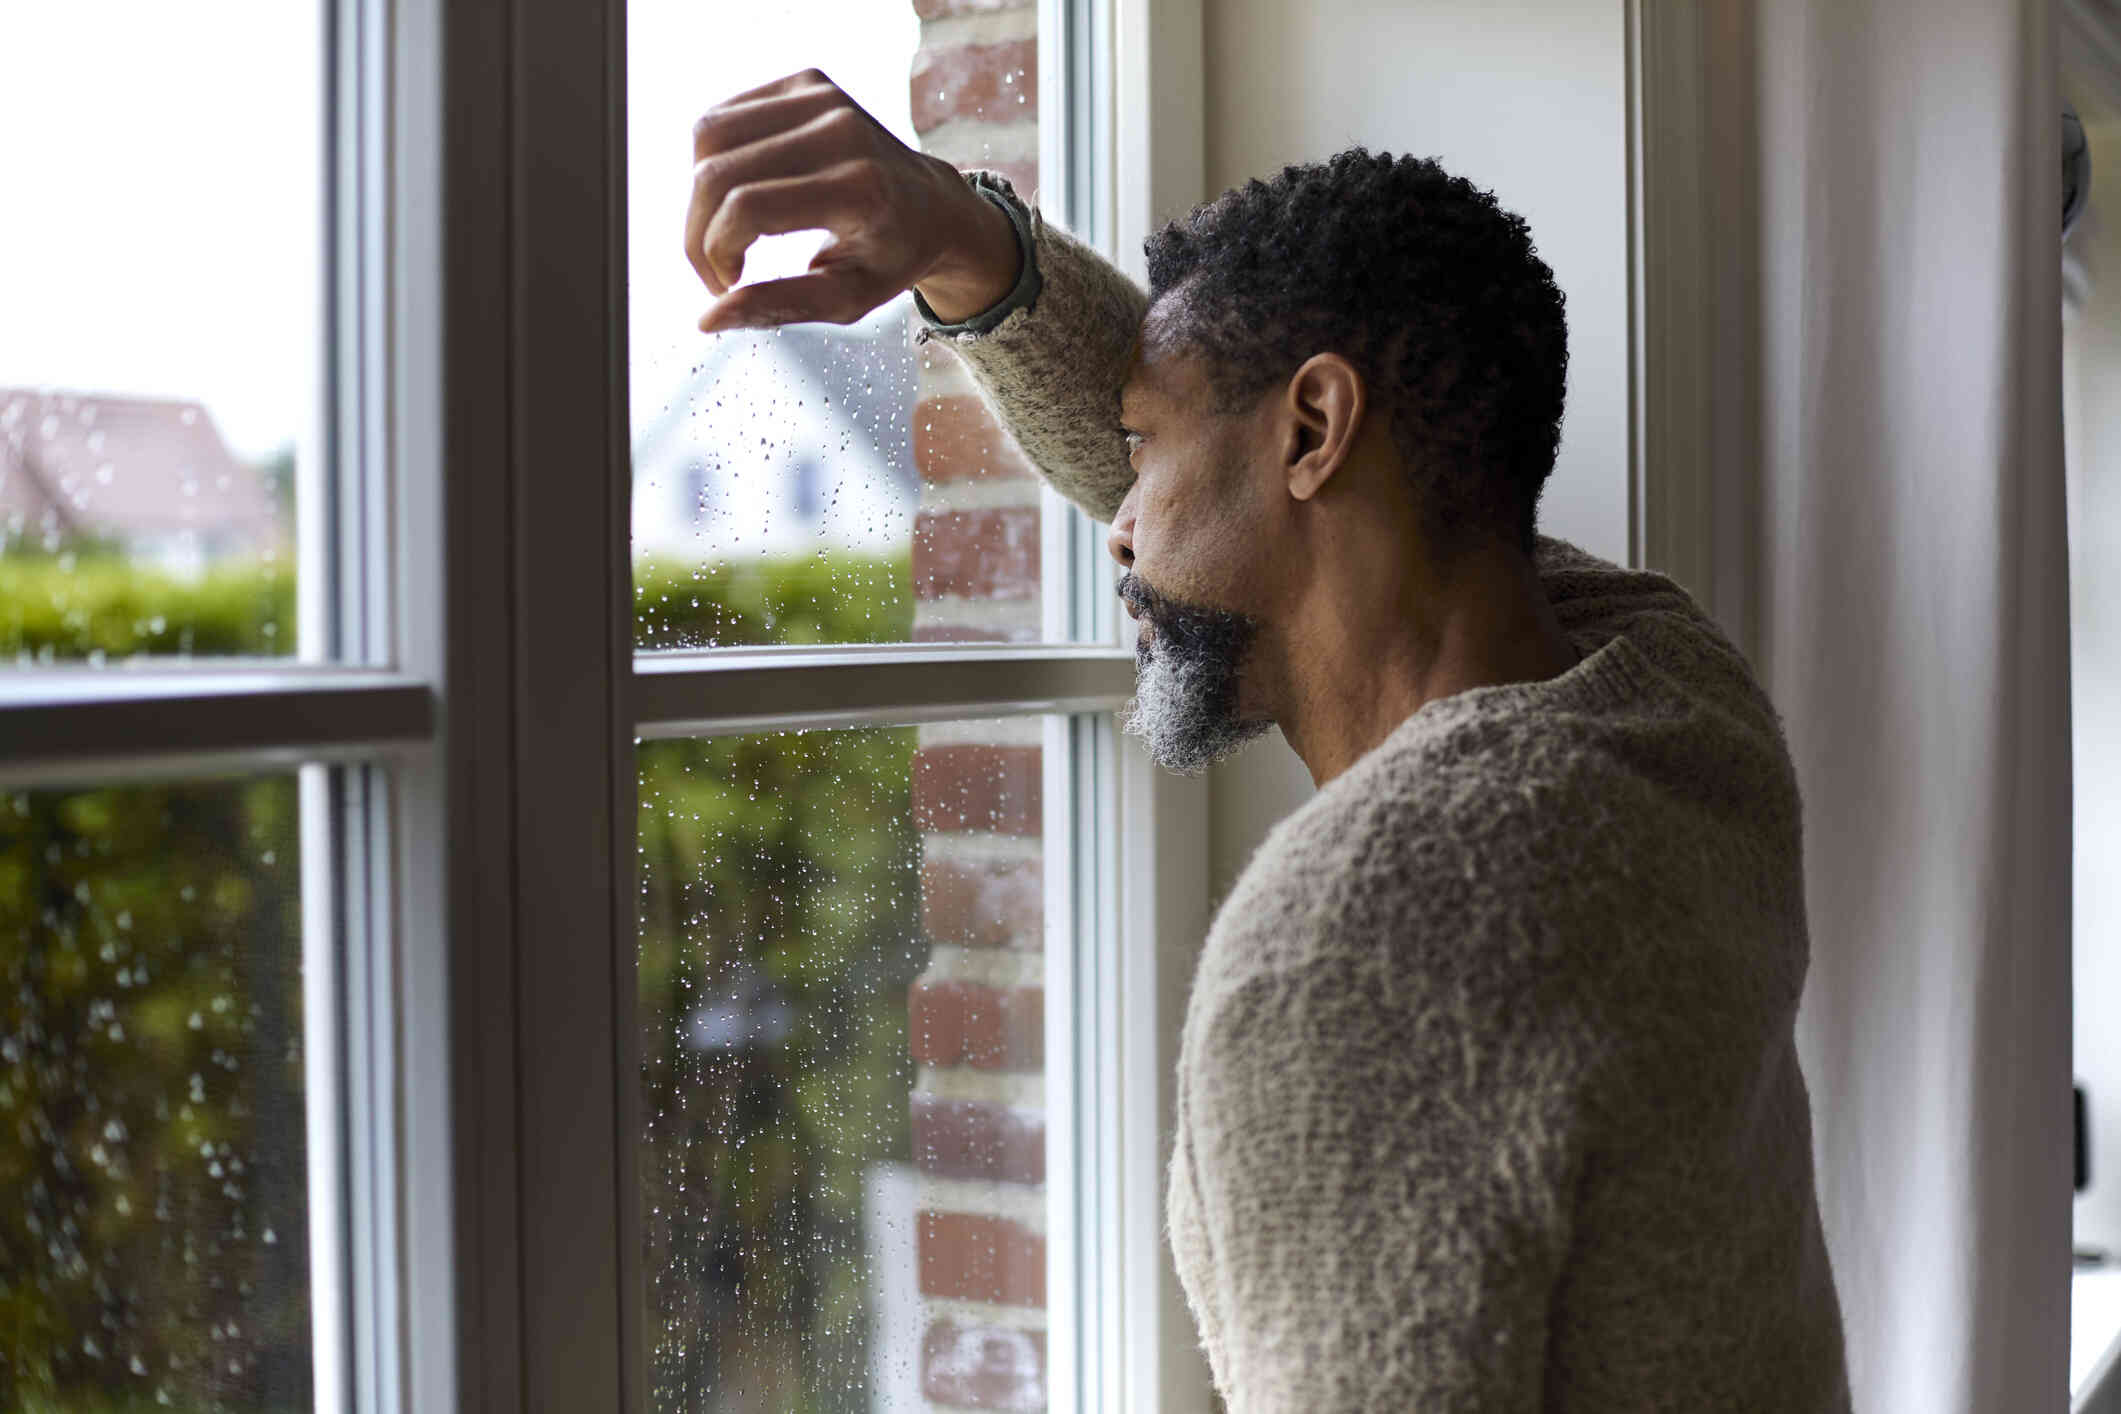 A mature man looks upset as he leans against a window  in his home on a rainy day.